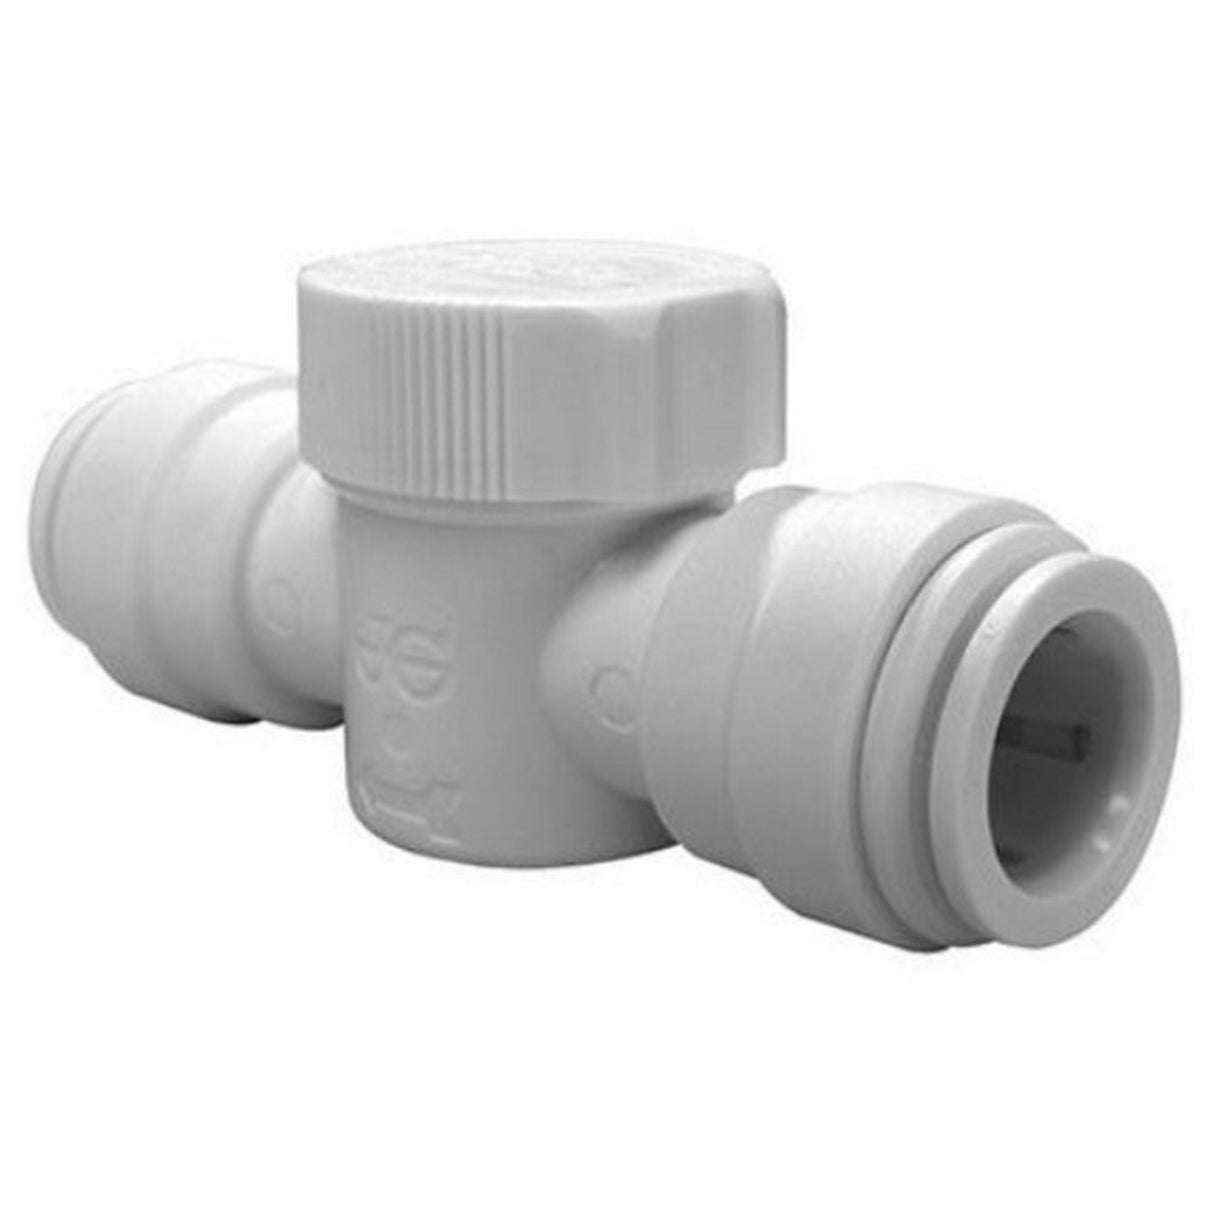 JG Speedfit Push Fit 15mm Inline Hot & Cold Water Tap/ Valve - White